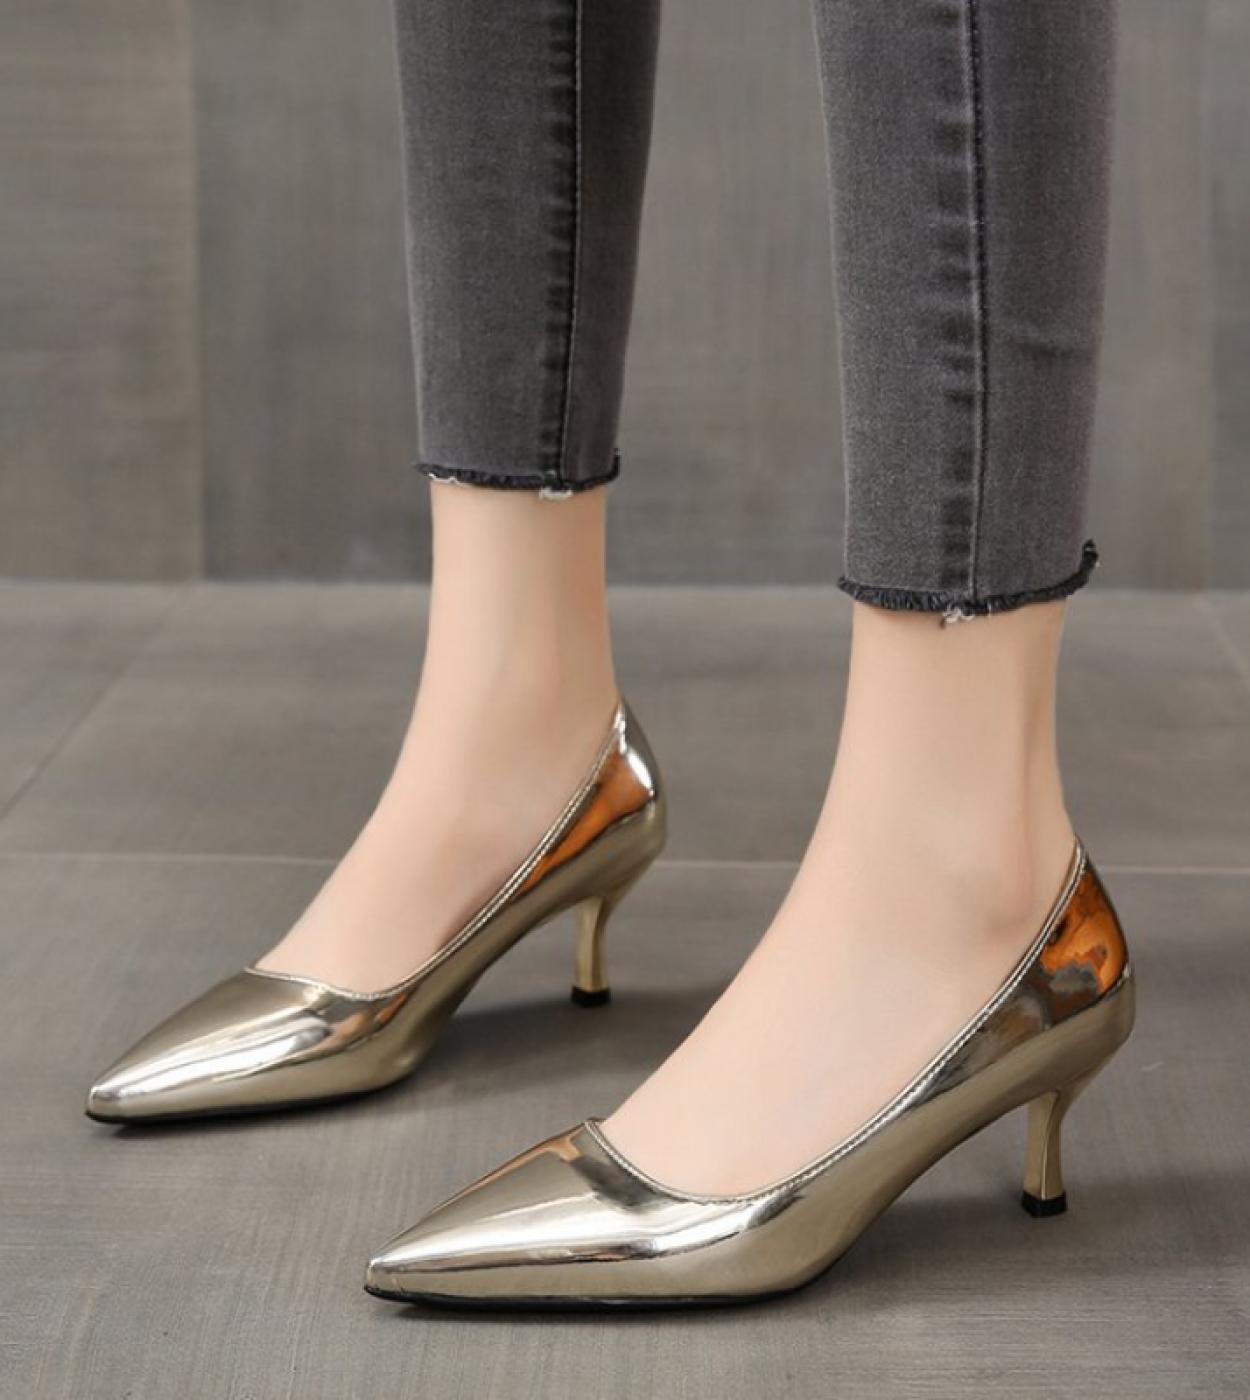 New Hot Women Shoes Pointed Toe Pumps Patent Leather Dress High Heels Boat Shoes Wedding Shoes  Plus Size 35 45 Zapatos 